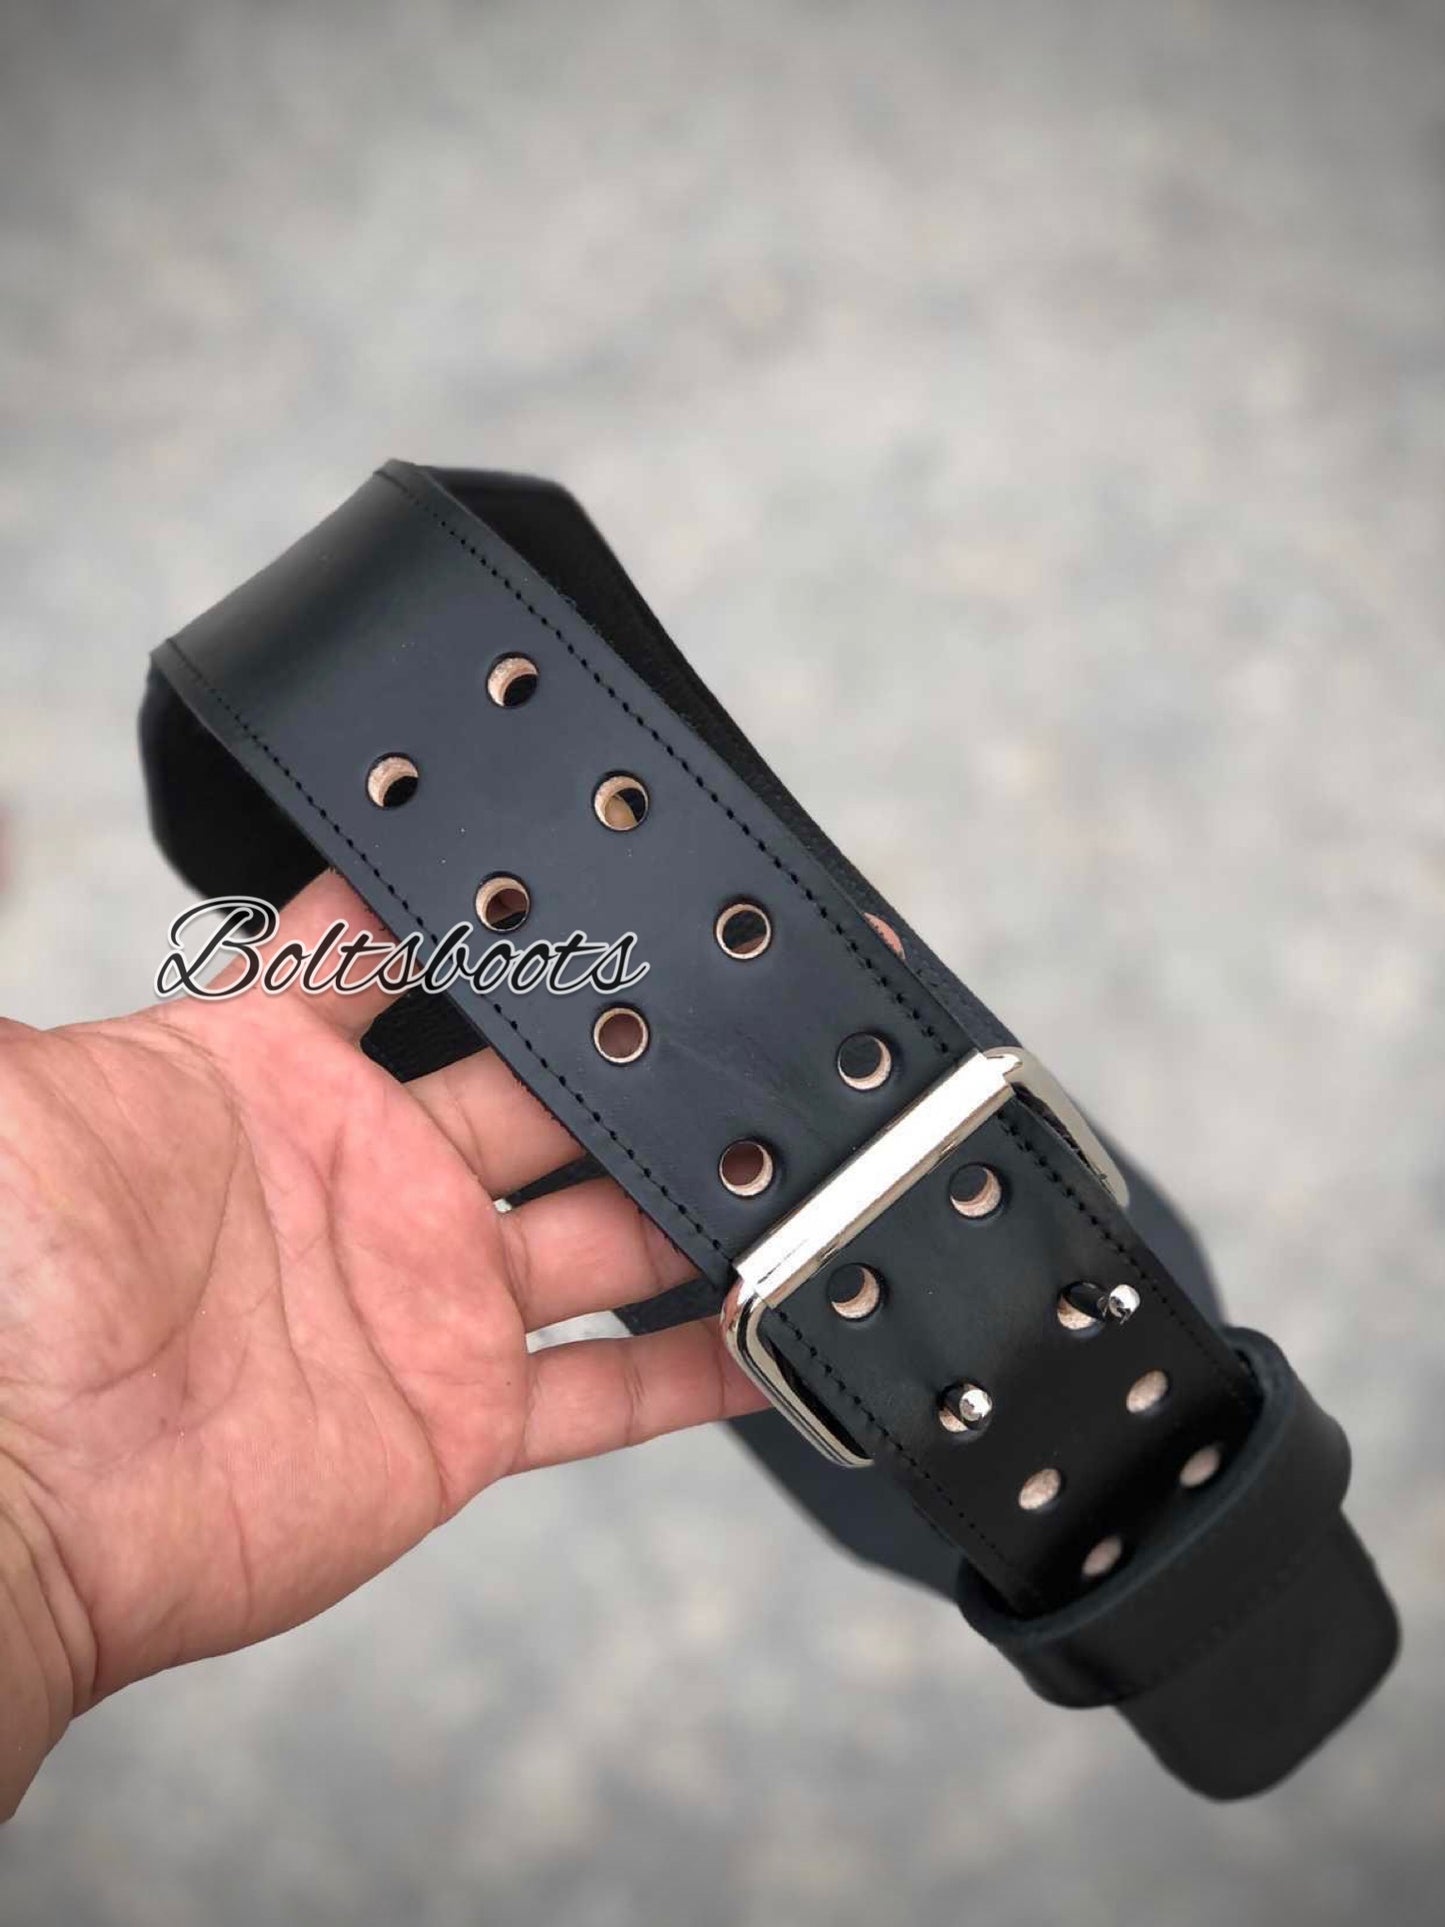 BB Weight belt (( your name included) by Boltsbootsbrand